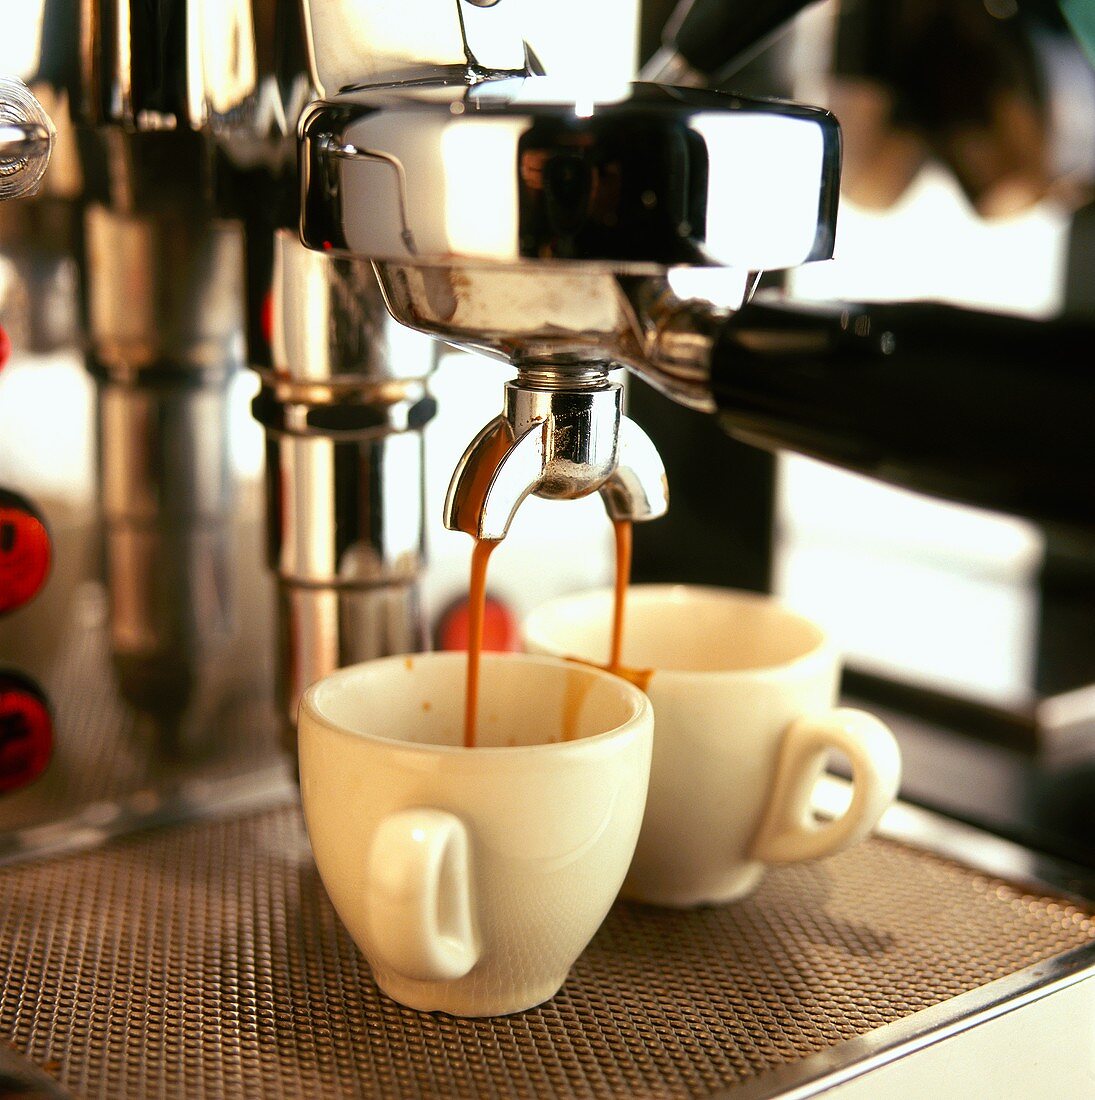 Espresso running out of espresso machine into two cups